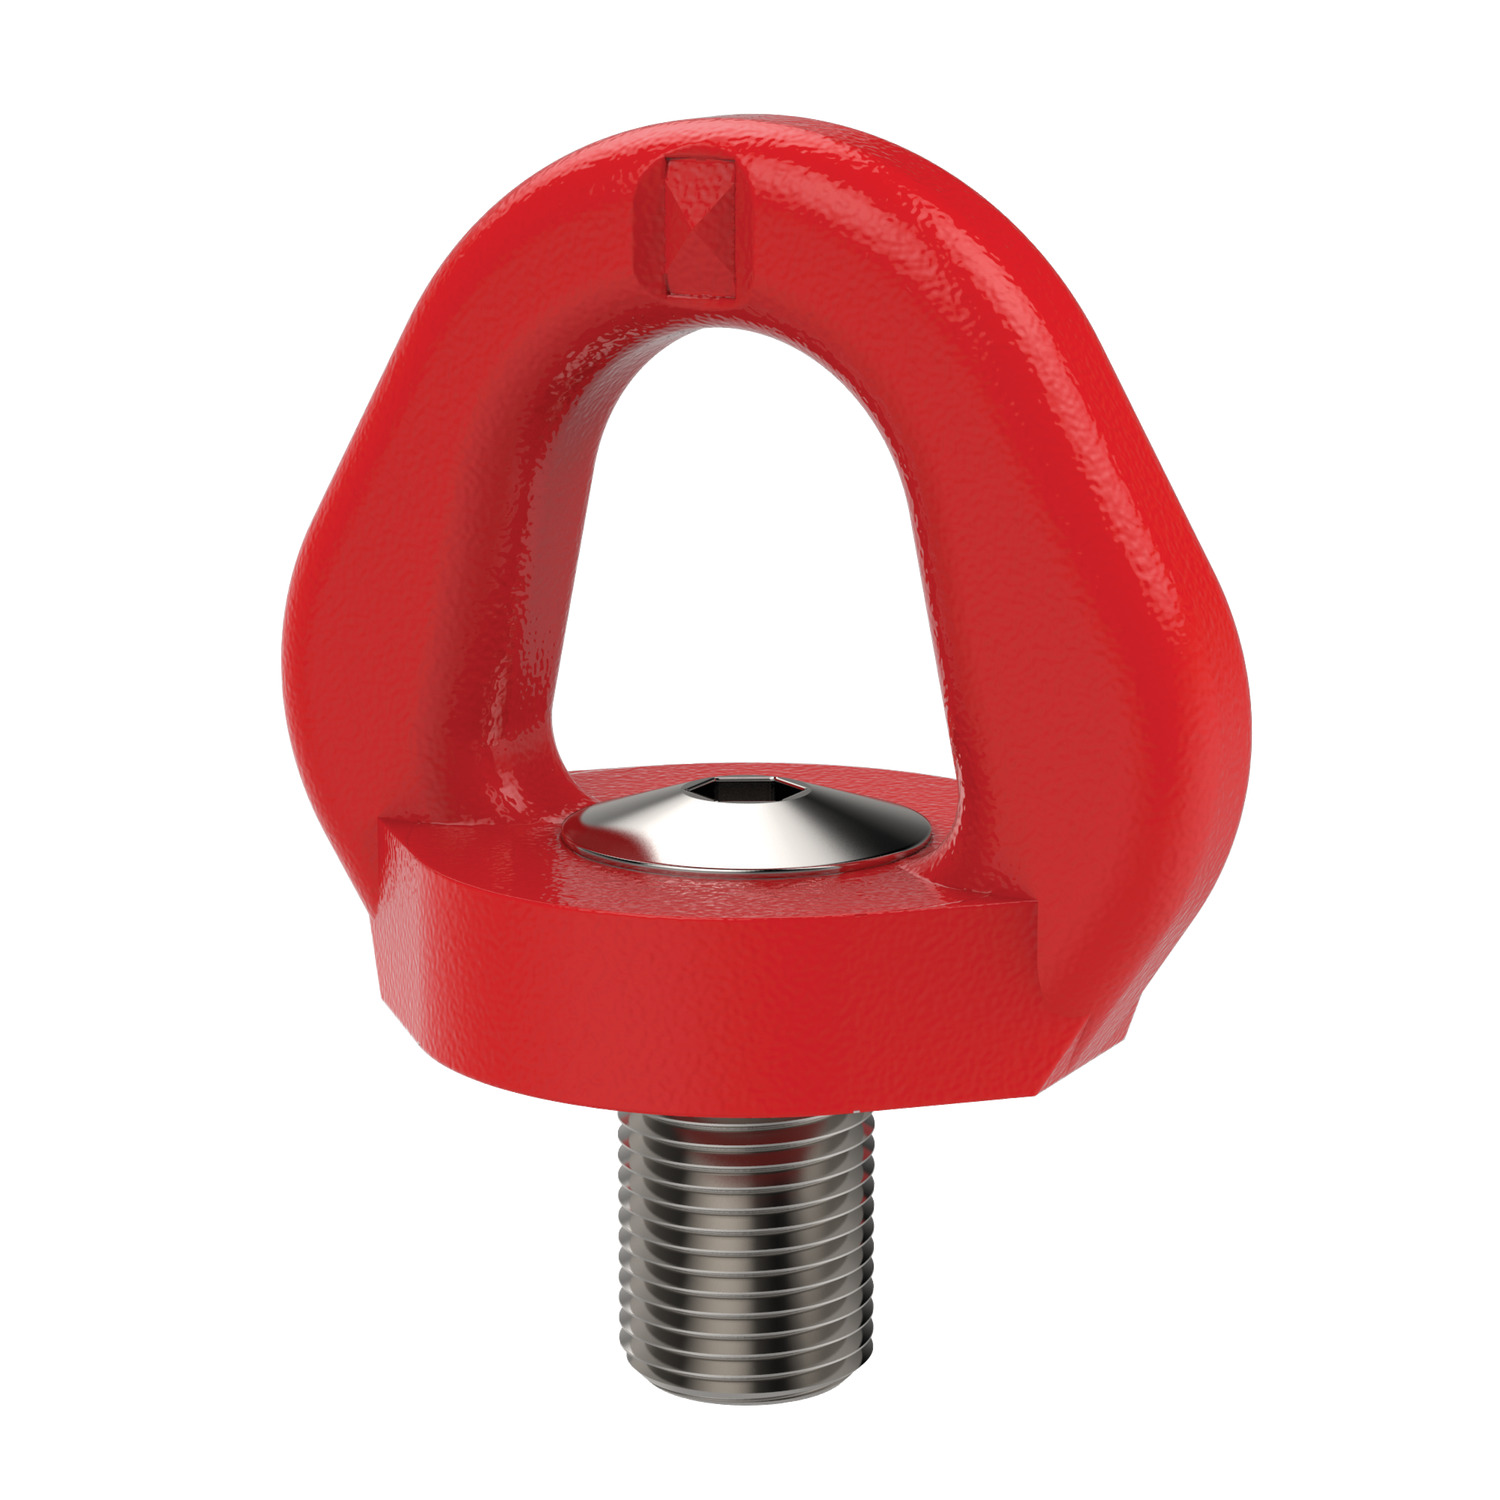 Swivel Eye Bolts Male Male swivel ring with single 360° articulation and coarse thread. Made from high tensile steel of strength class&gt;8. Features automatic position recovery to orient with sling direction.